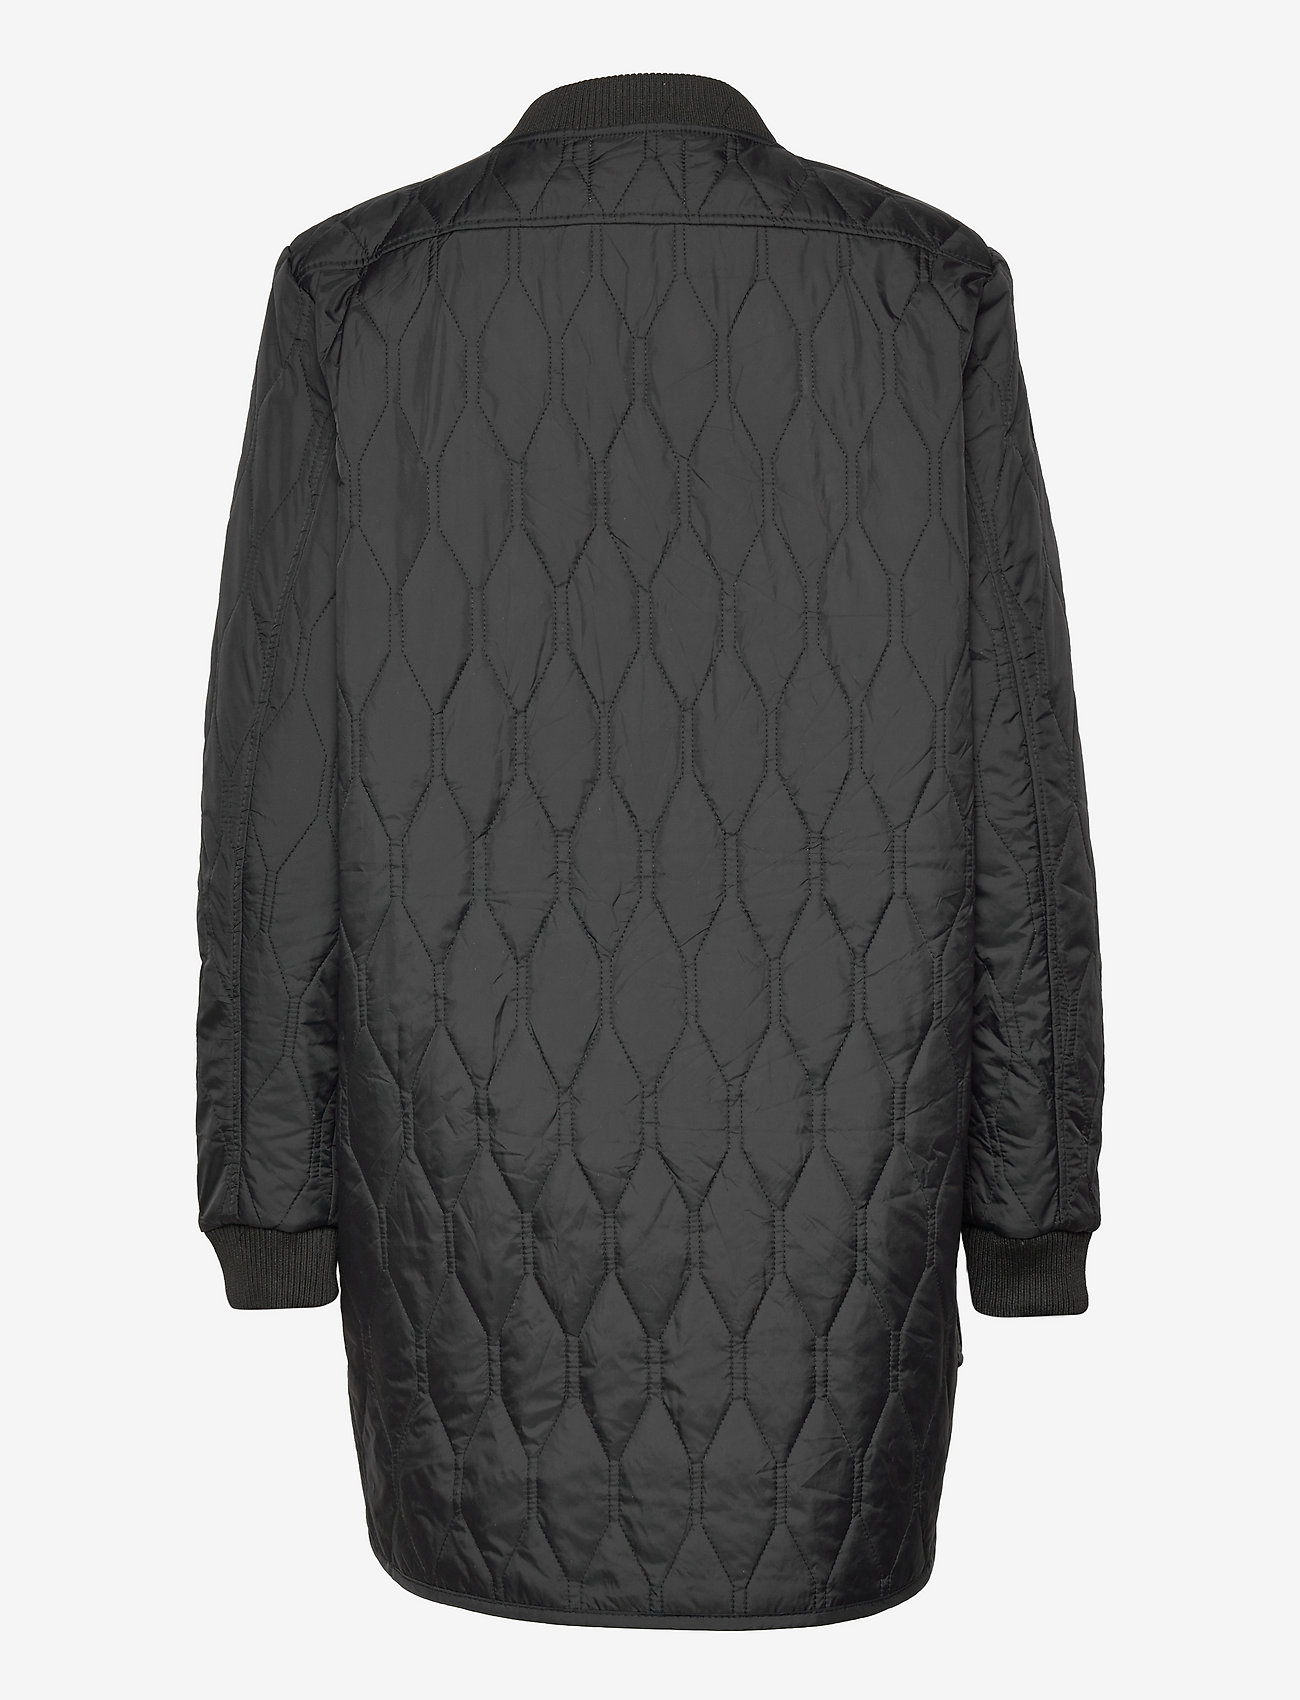 Global Funk - Even - quilted jackets - black - 1